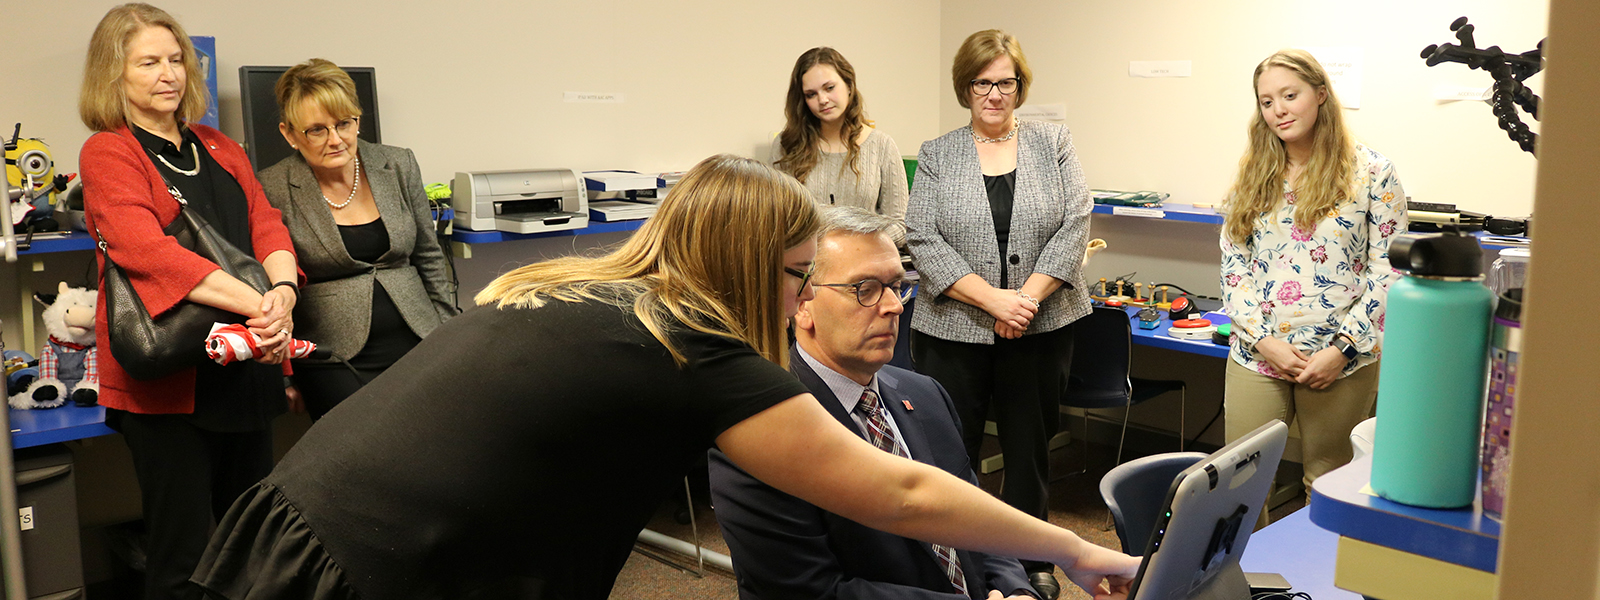 Chancellor Ronnie Green receives instructions from Abby Crimmins, a speech-language pathology graduate student, on how to use the eye gaze system in the AAC Lab as several people look on.